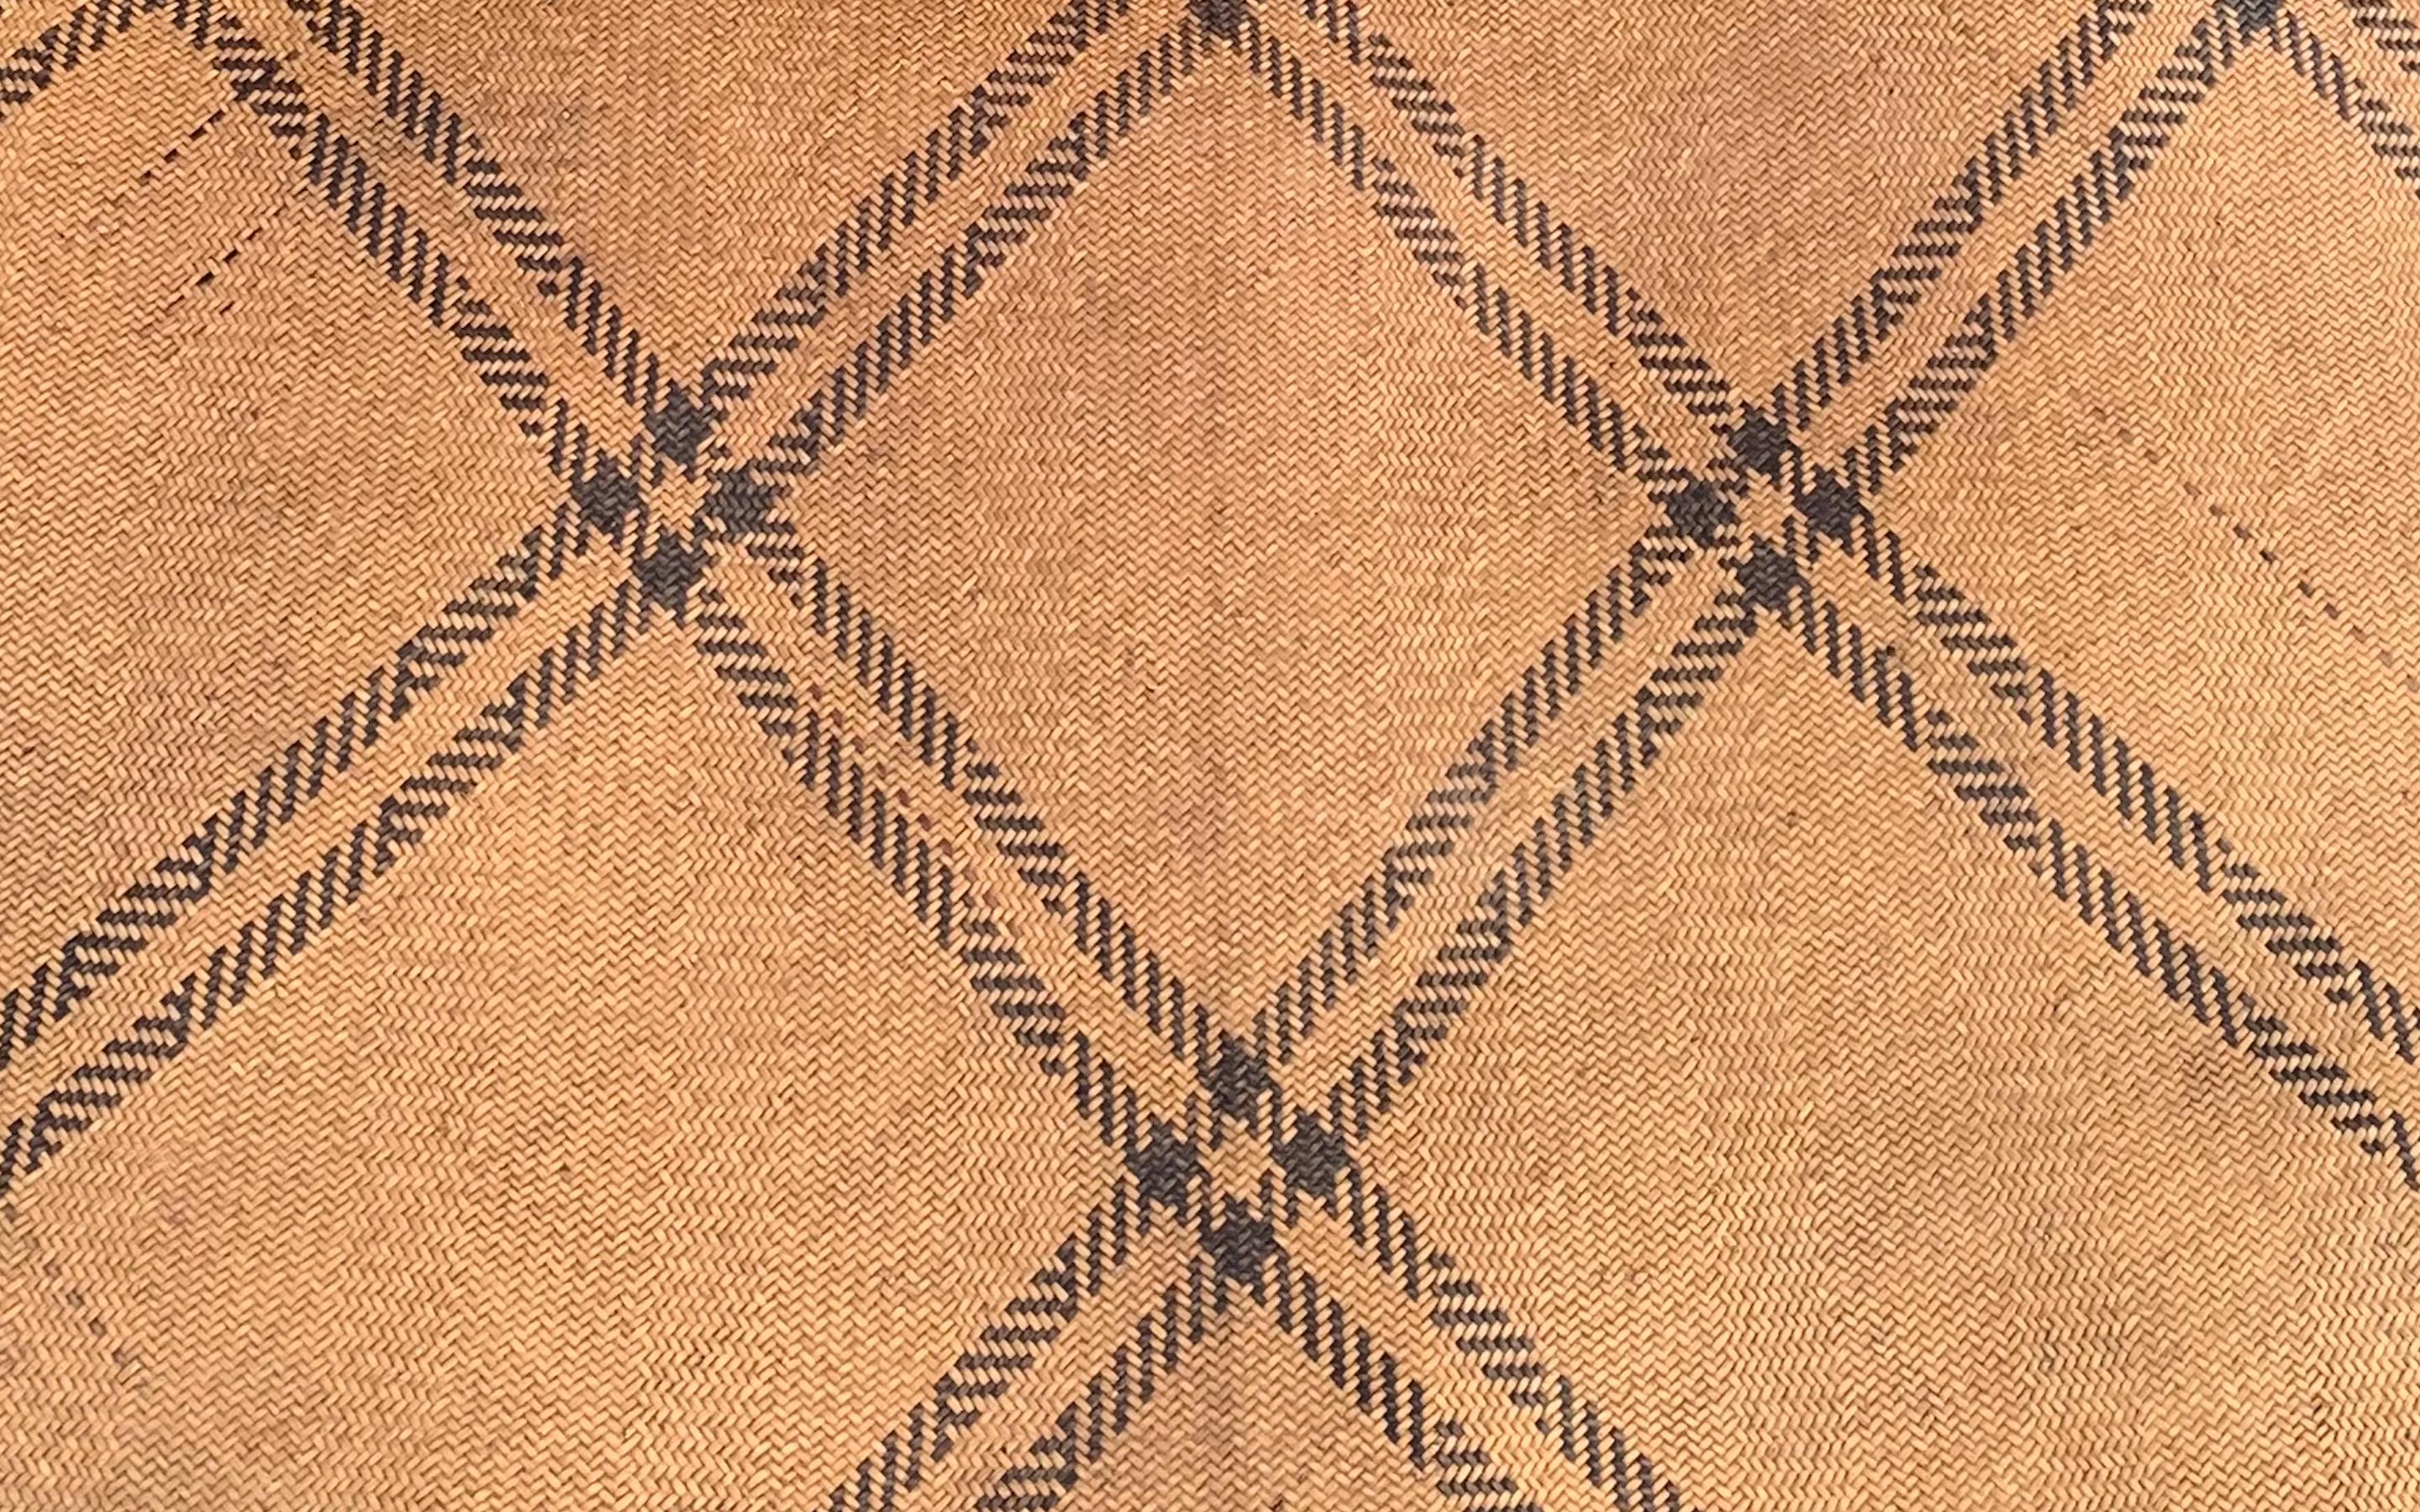 This floor mat once occupied a tribal long house of the Dayak Tribe of Borneo. It is made from woven dyed and natural coloured rattan fibres & features diagonal black fibres. 

Dimension: Height 220cm x Width 130cm.
 